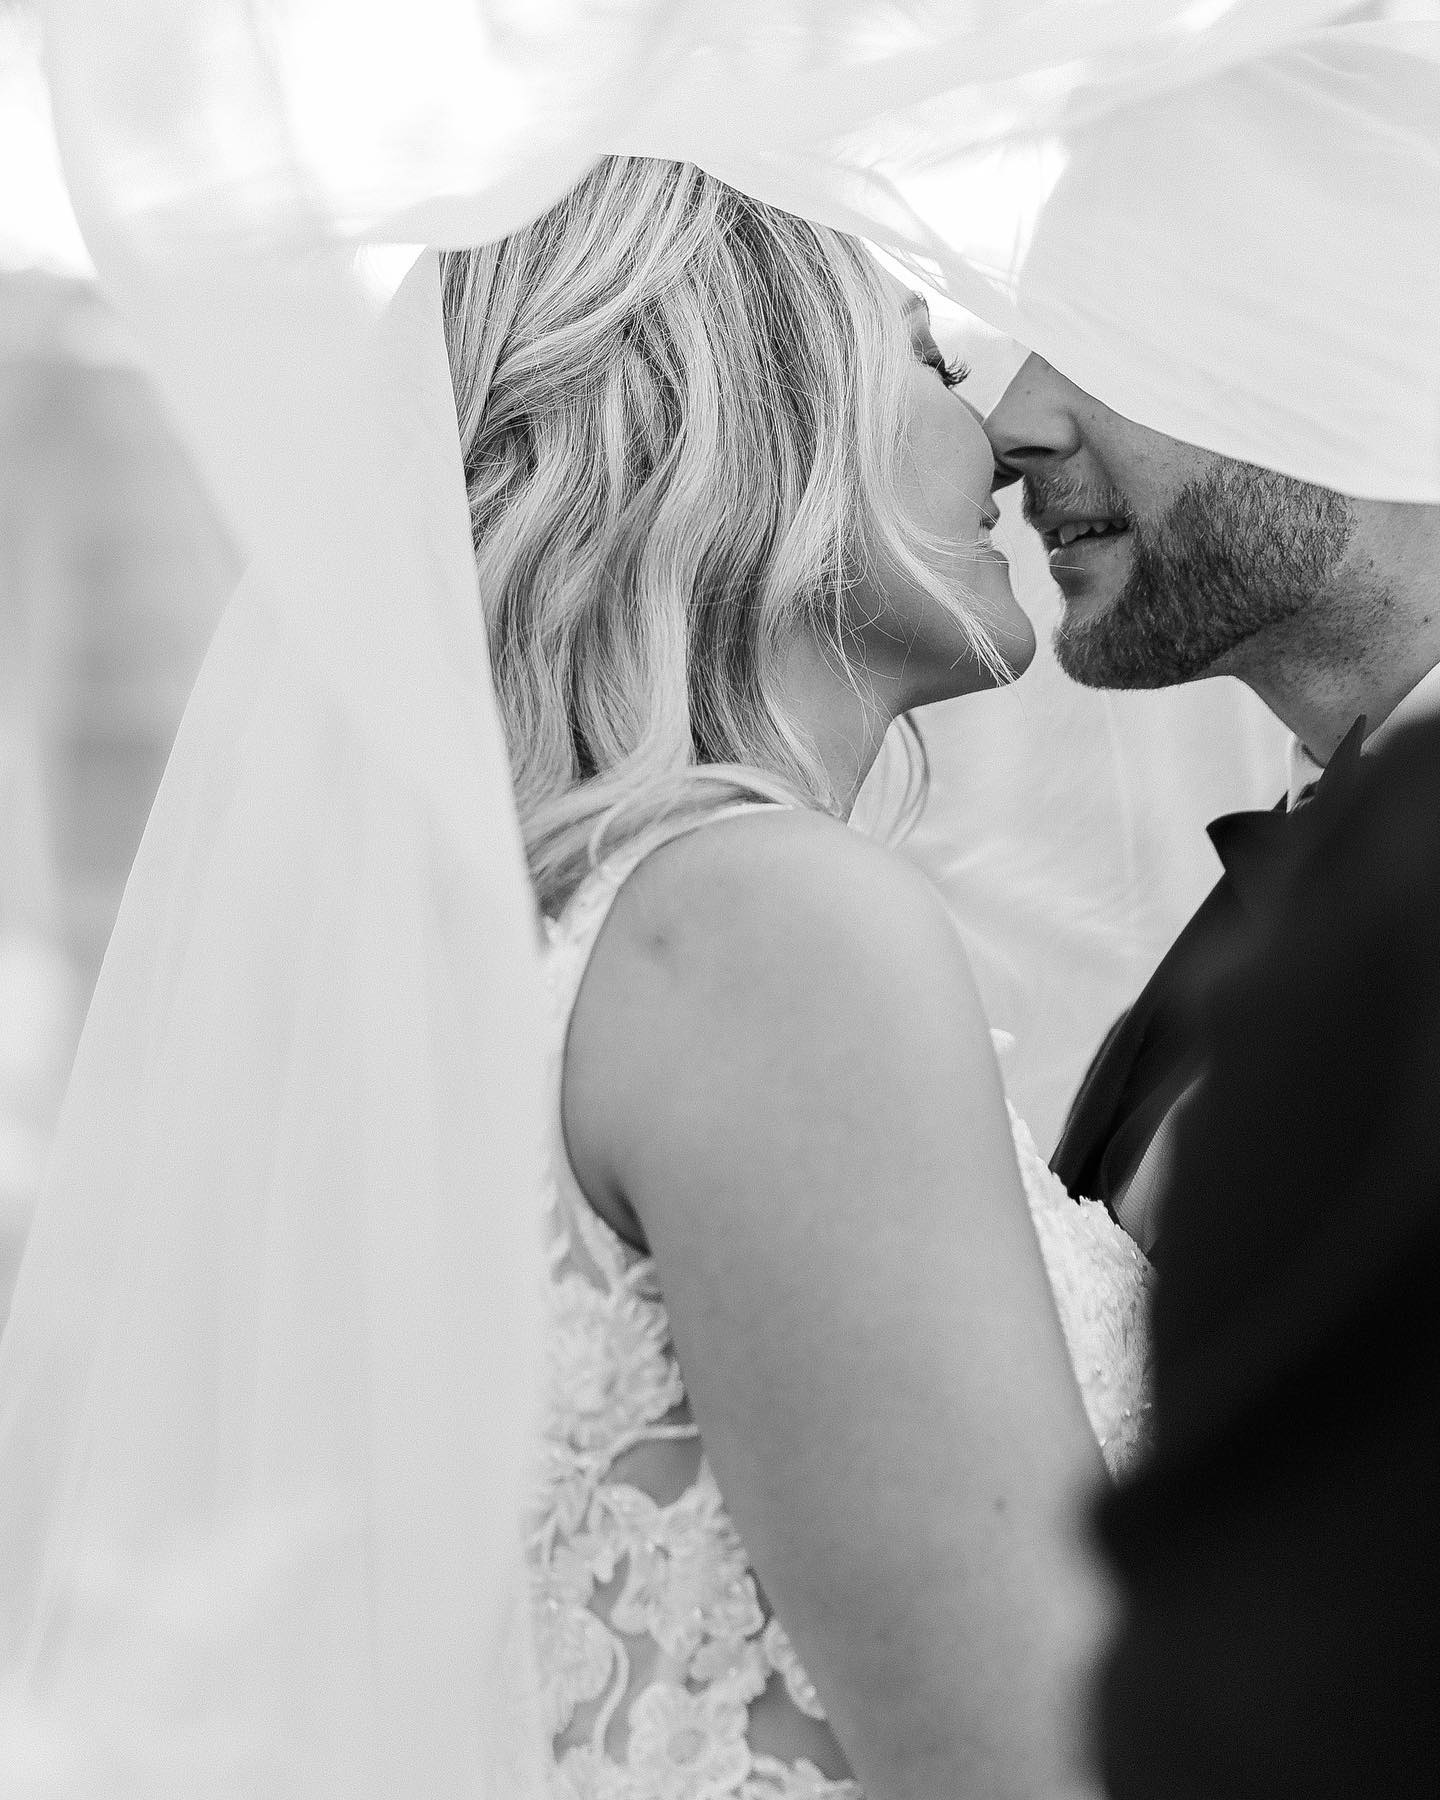 a black and white portrait of a couple sharing a intimate moment under the wedding veil